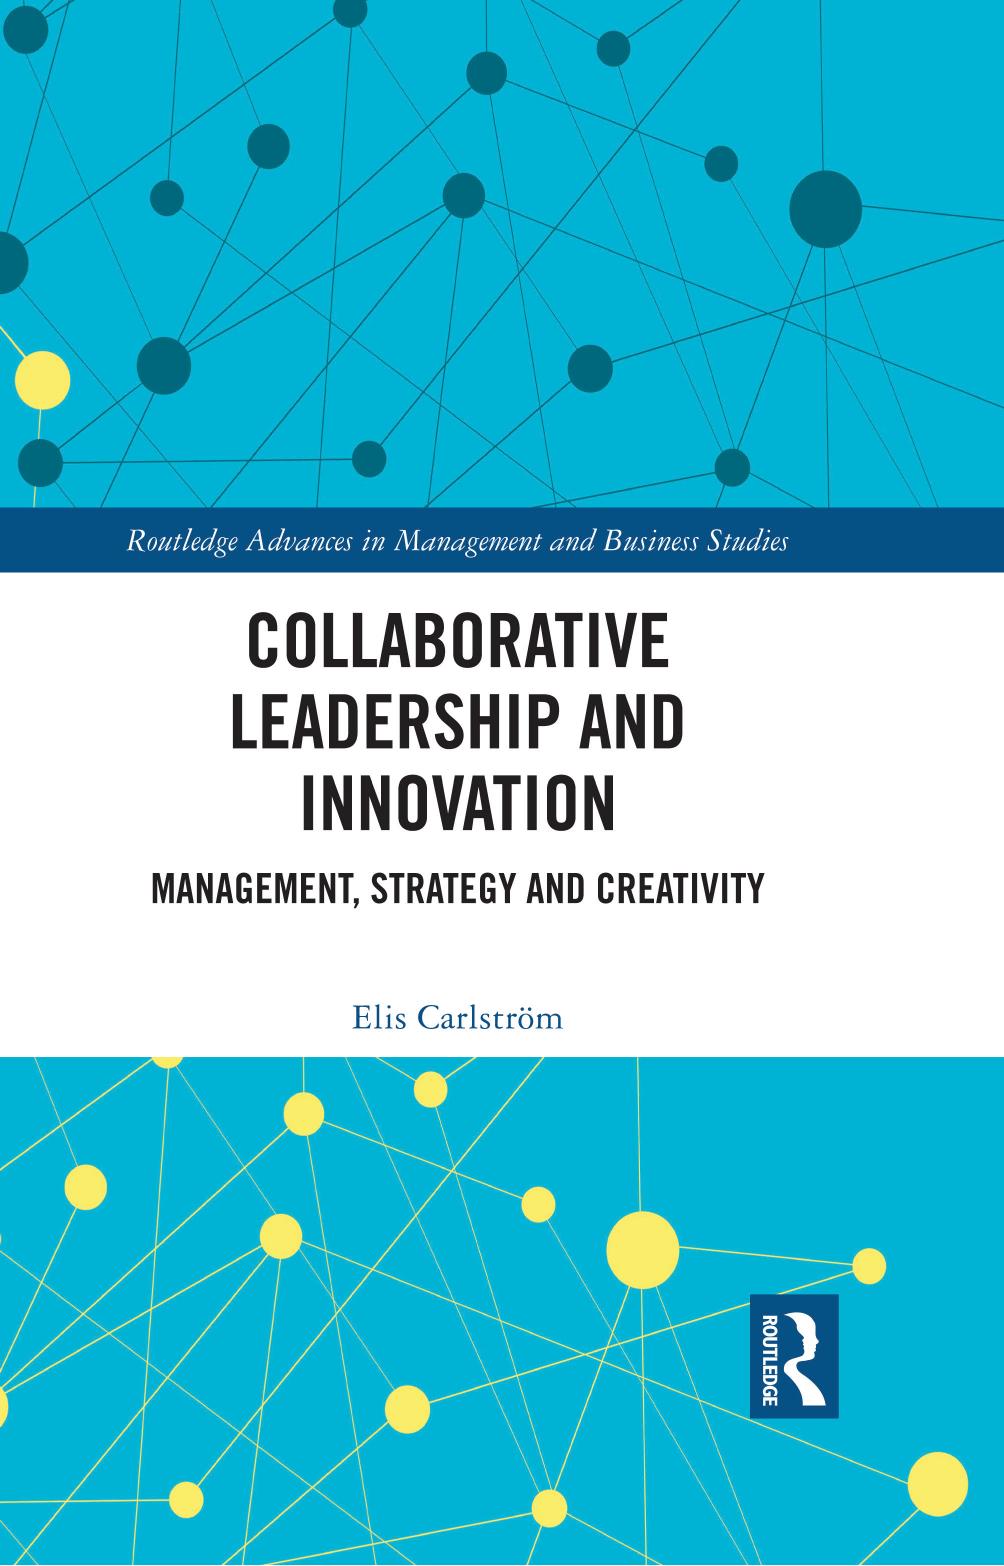 Collaborative Leadership and Innovation: Management, Strategy and Creativity by Elis Carlström